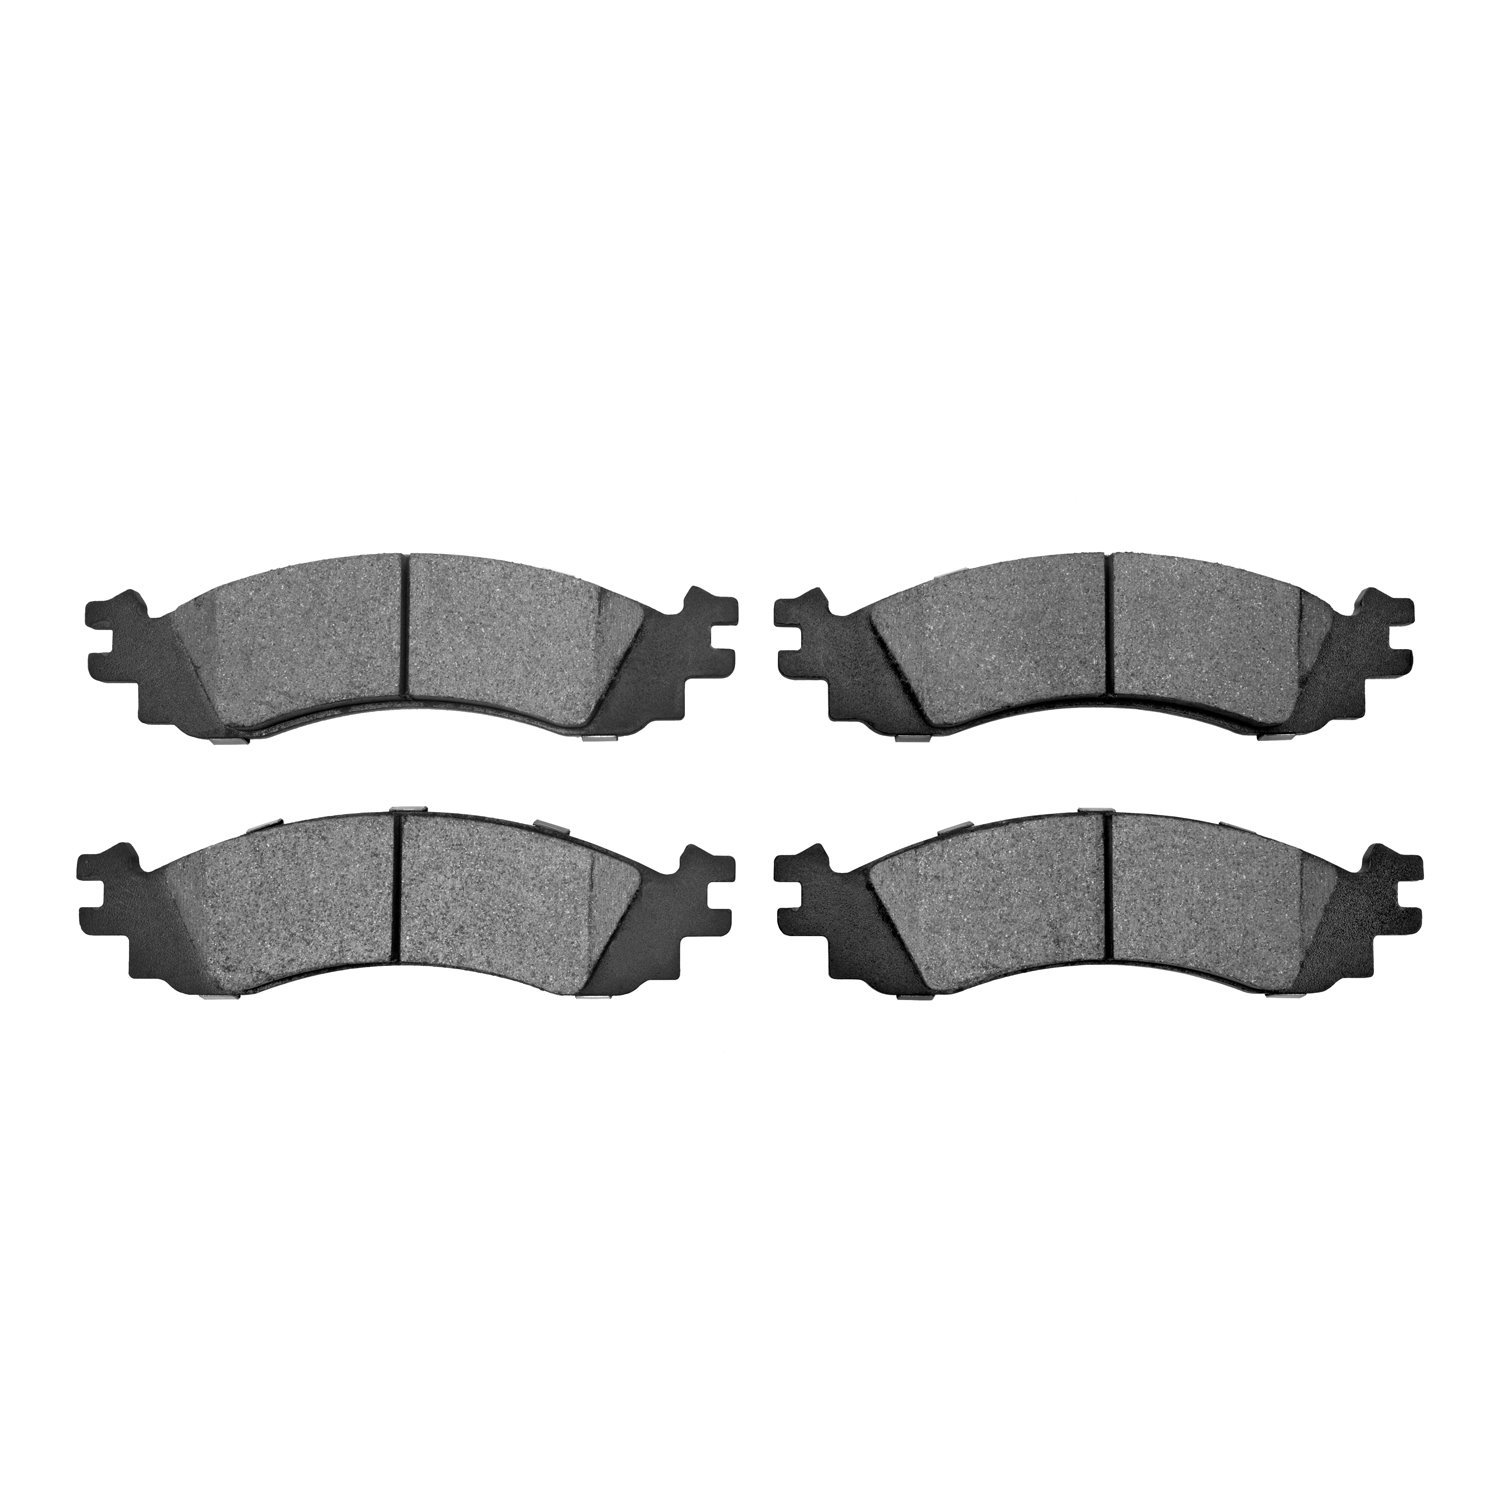 Super-Duty Brake Pads, 2006-2012 Ford/Lincoln/Mercury/Mazda, Position: Front